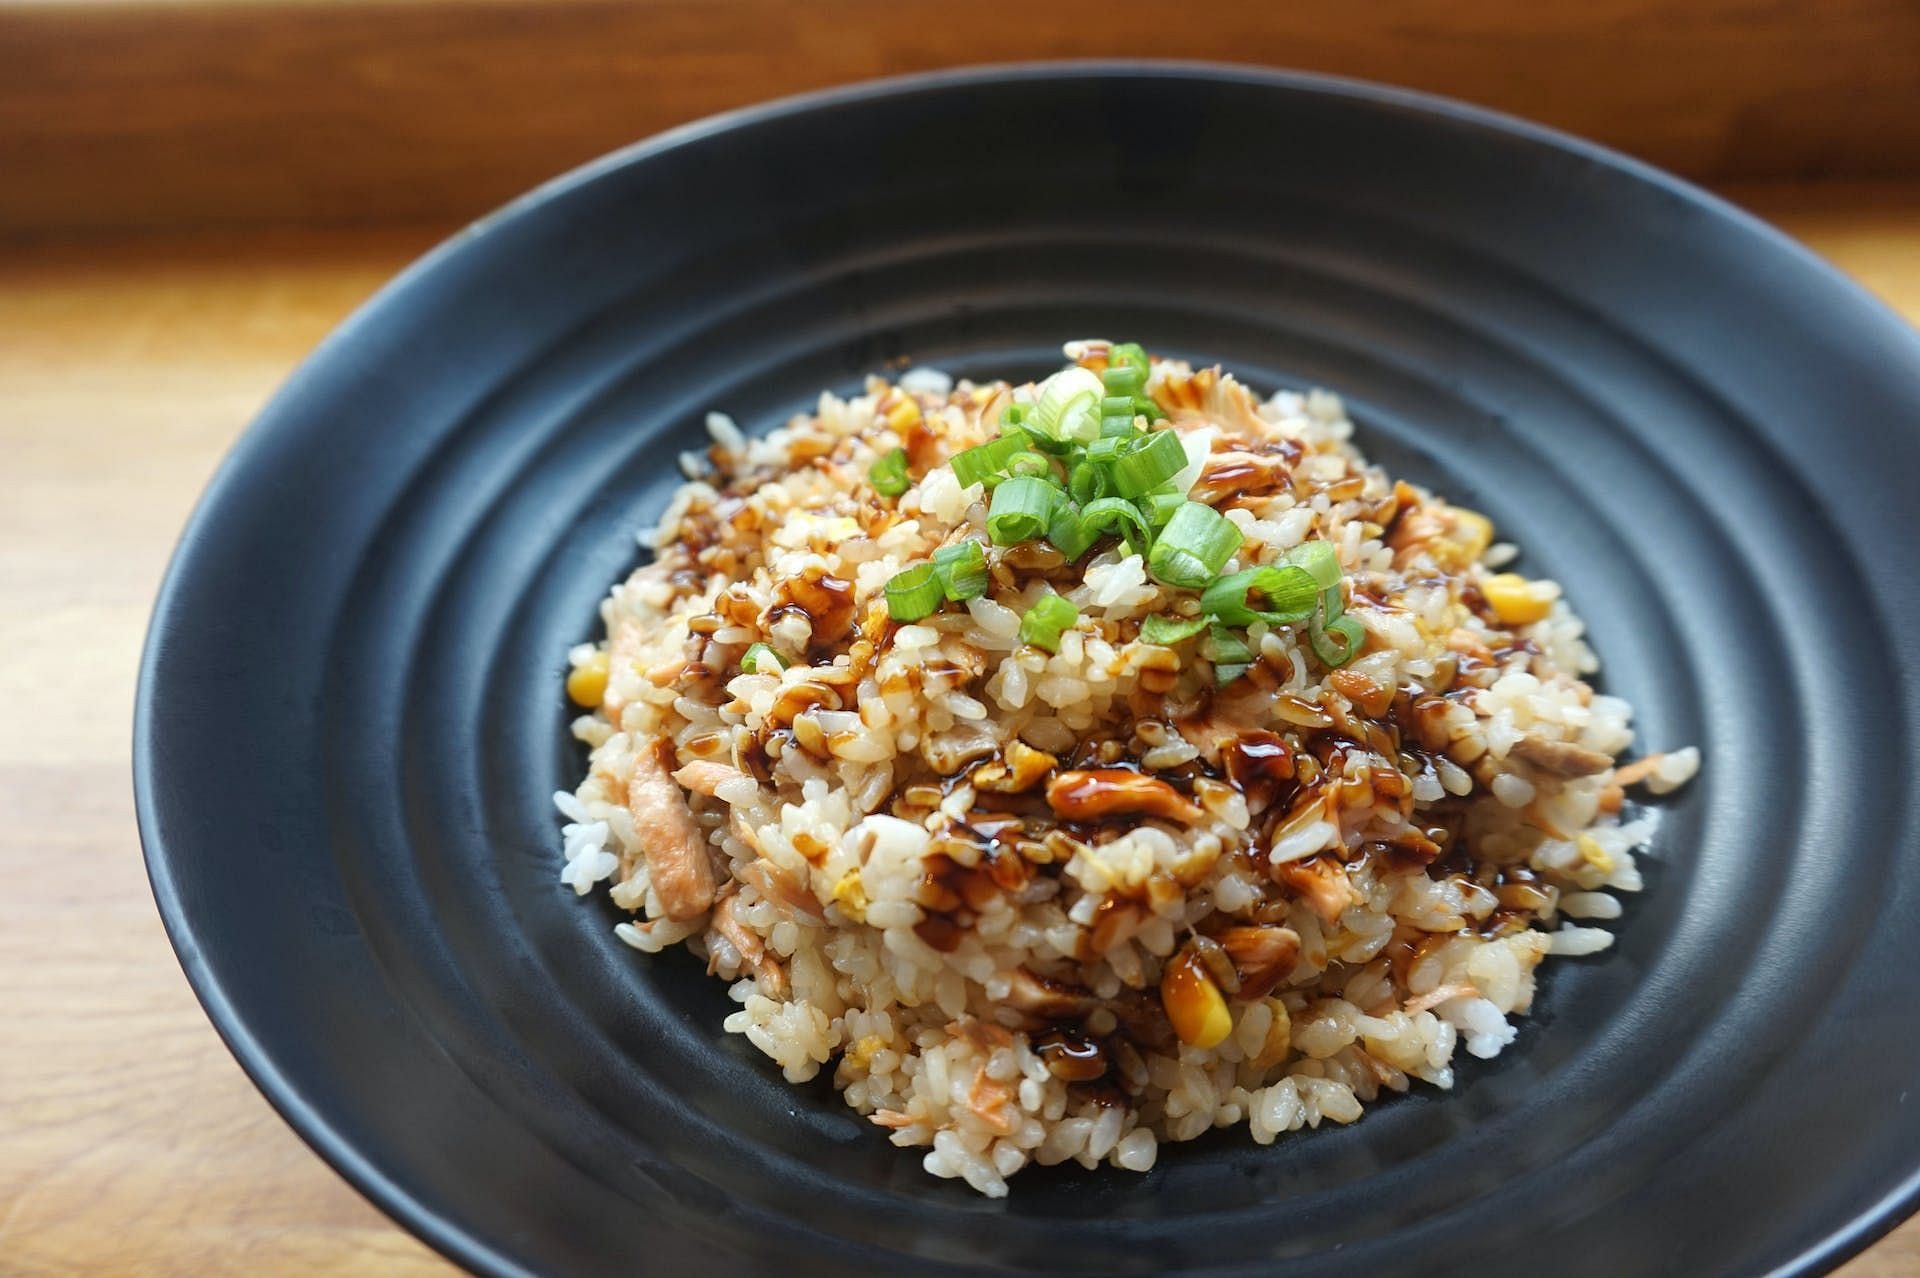 Brown rice is loaded with carbohydrates. (Image via Pexels/Trista Chen)